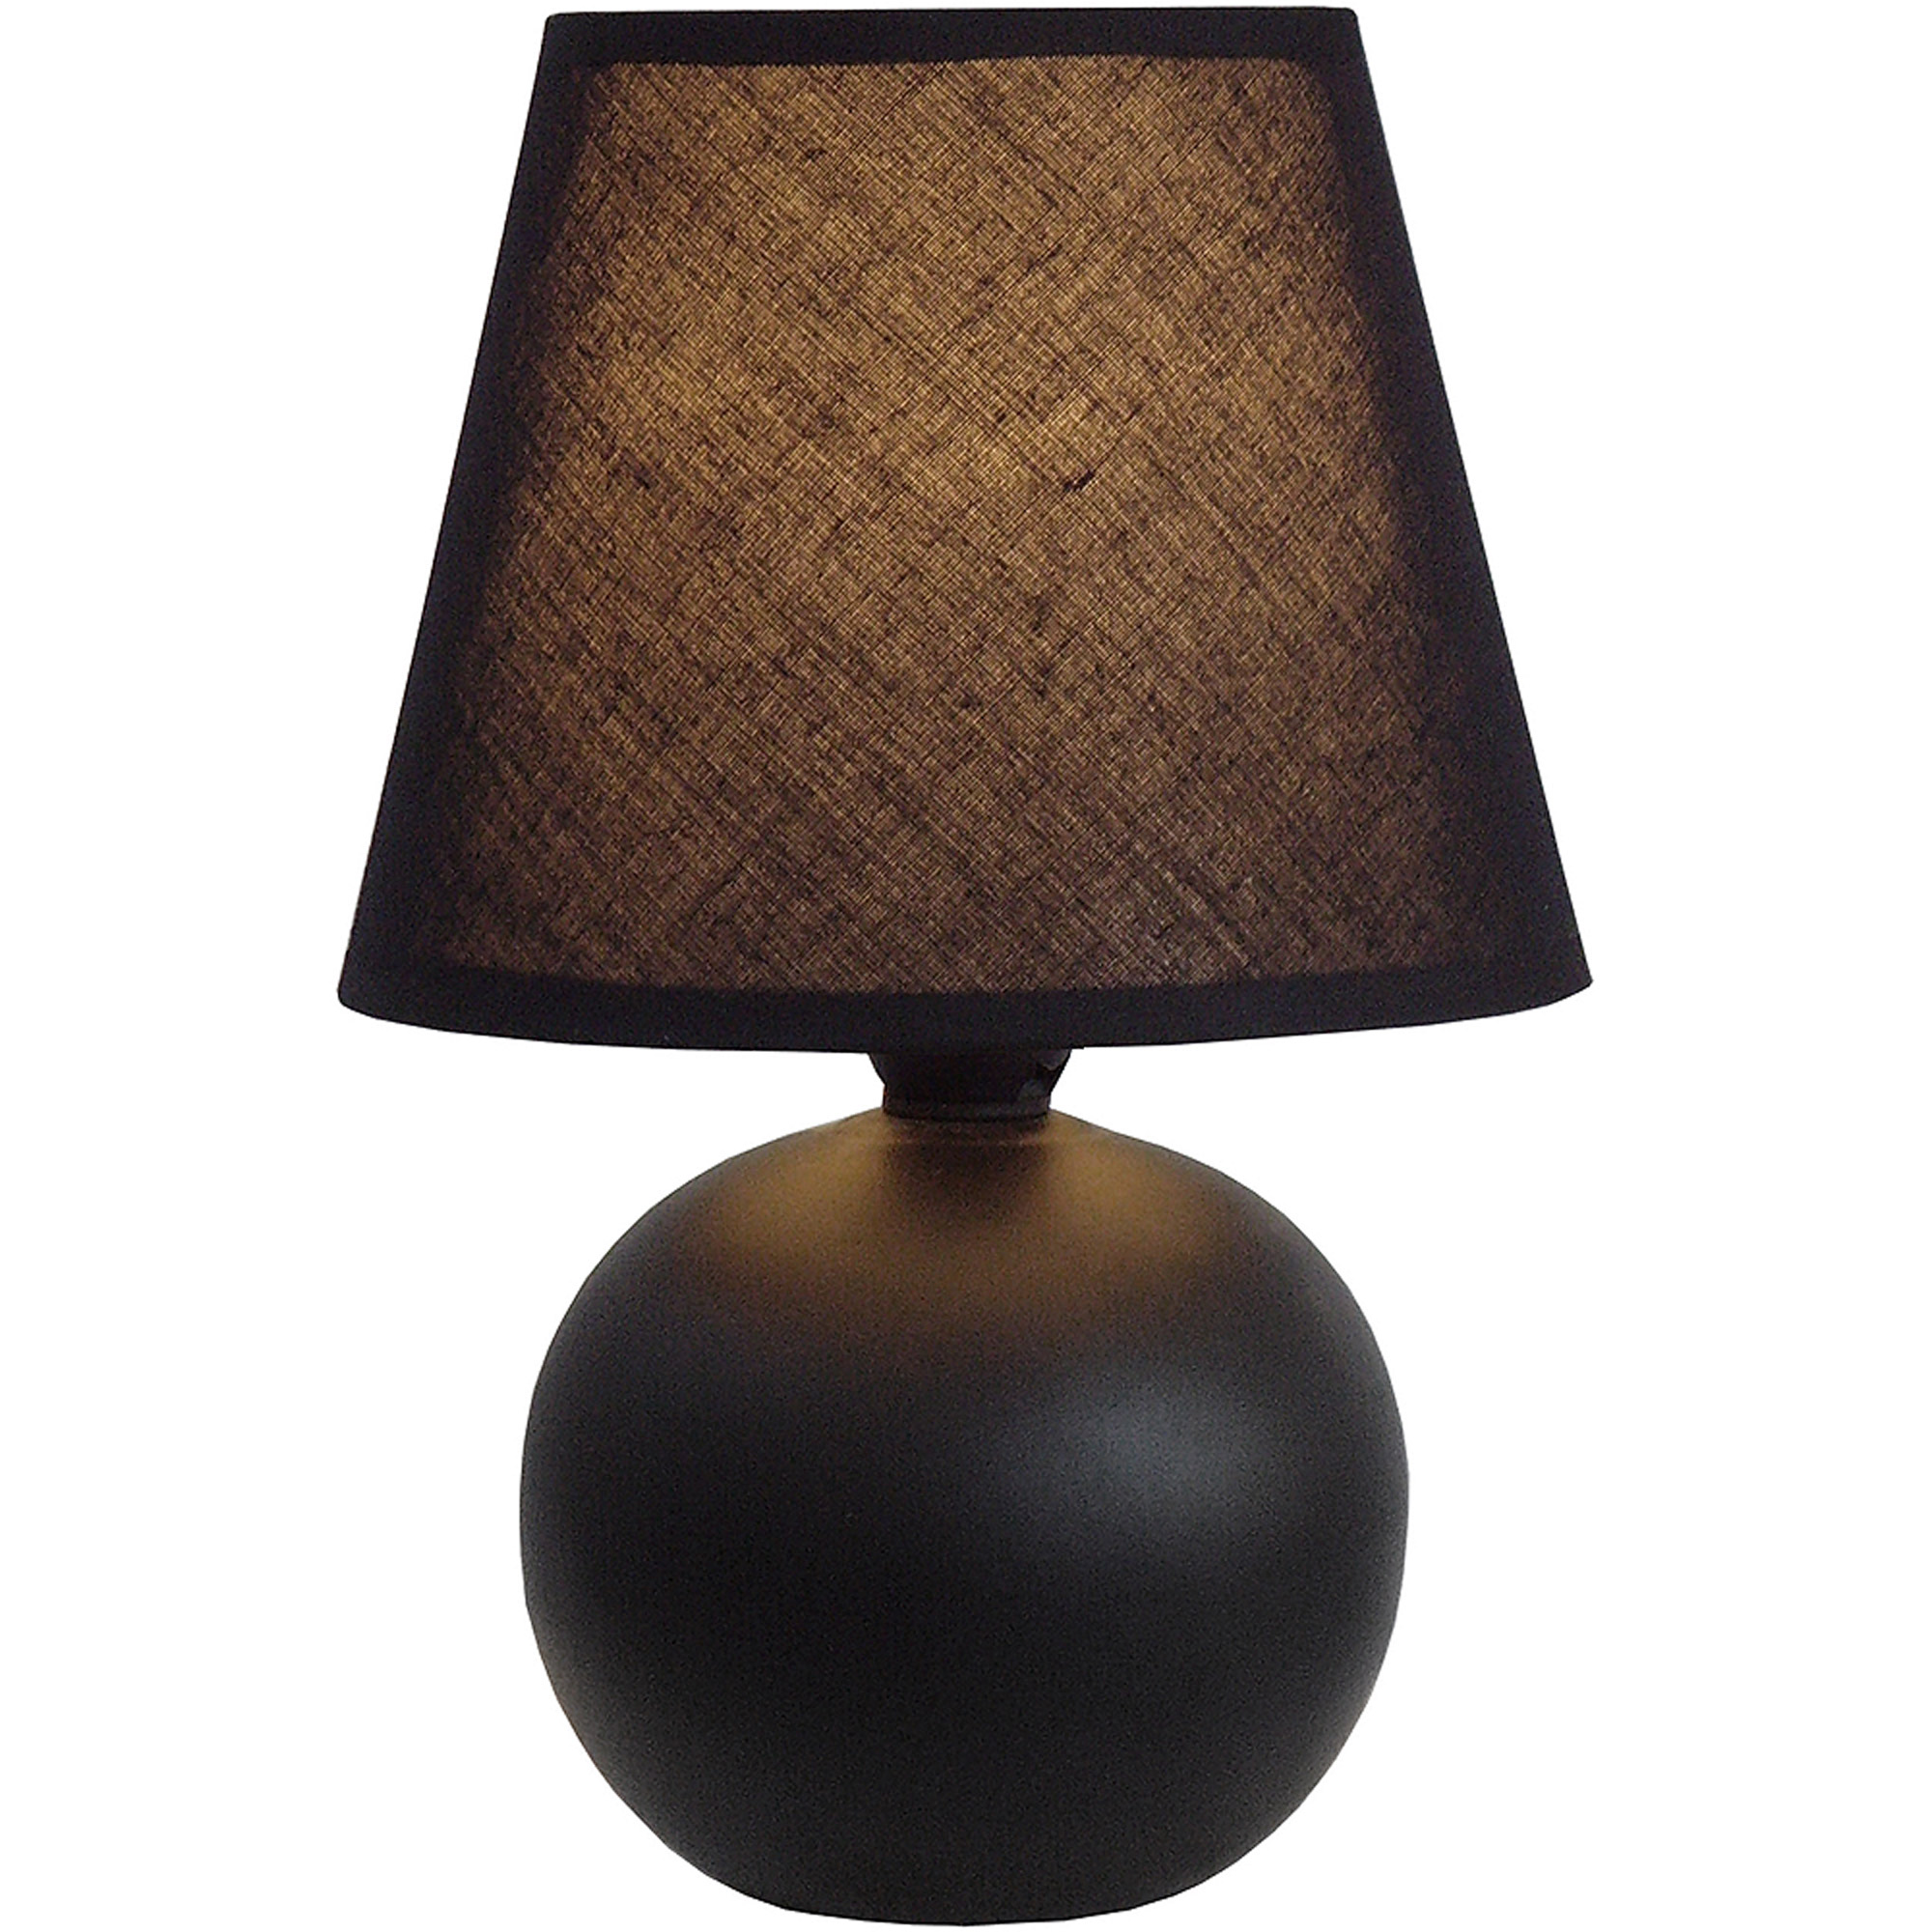 Spectacular Walmart Table Lamps About remodel Stunning Home Interior ...